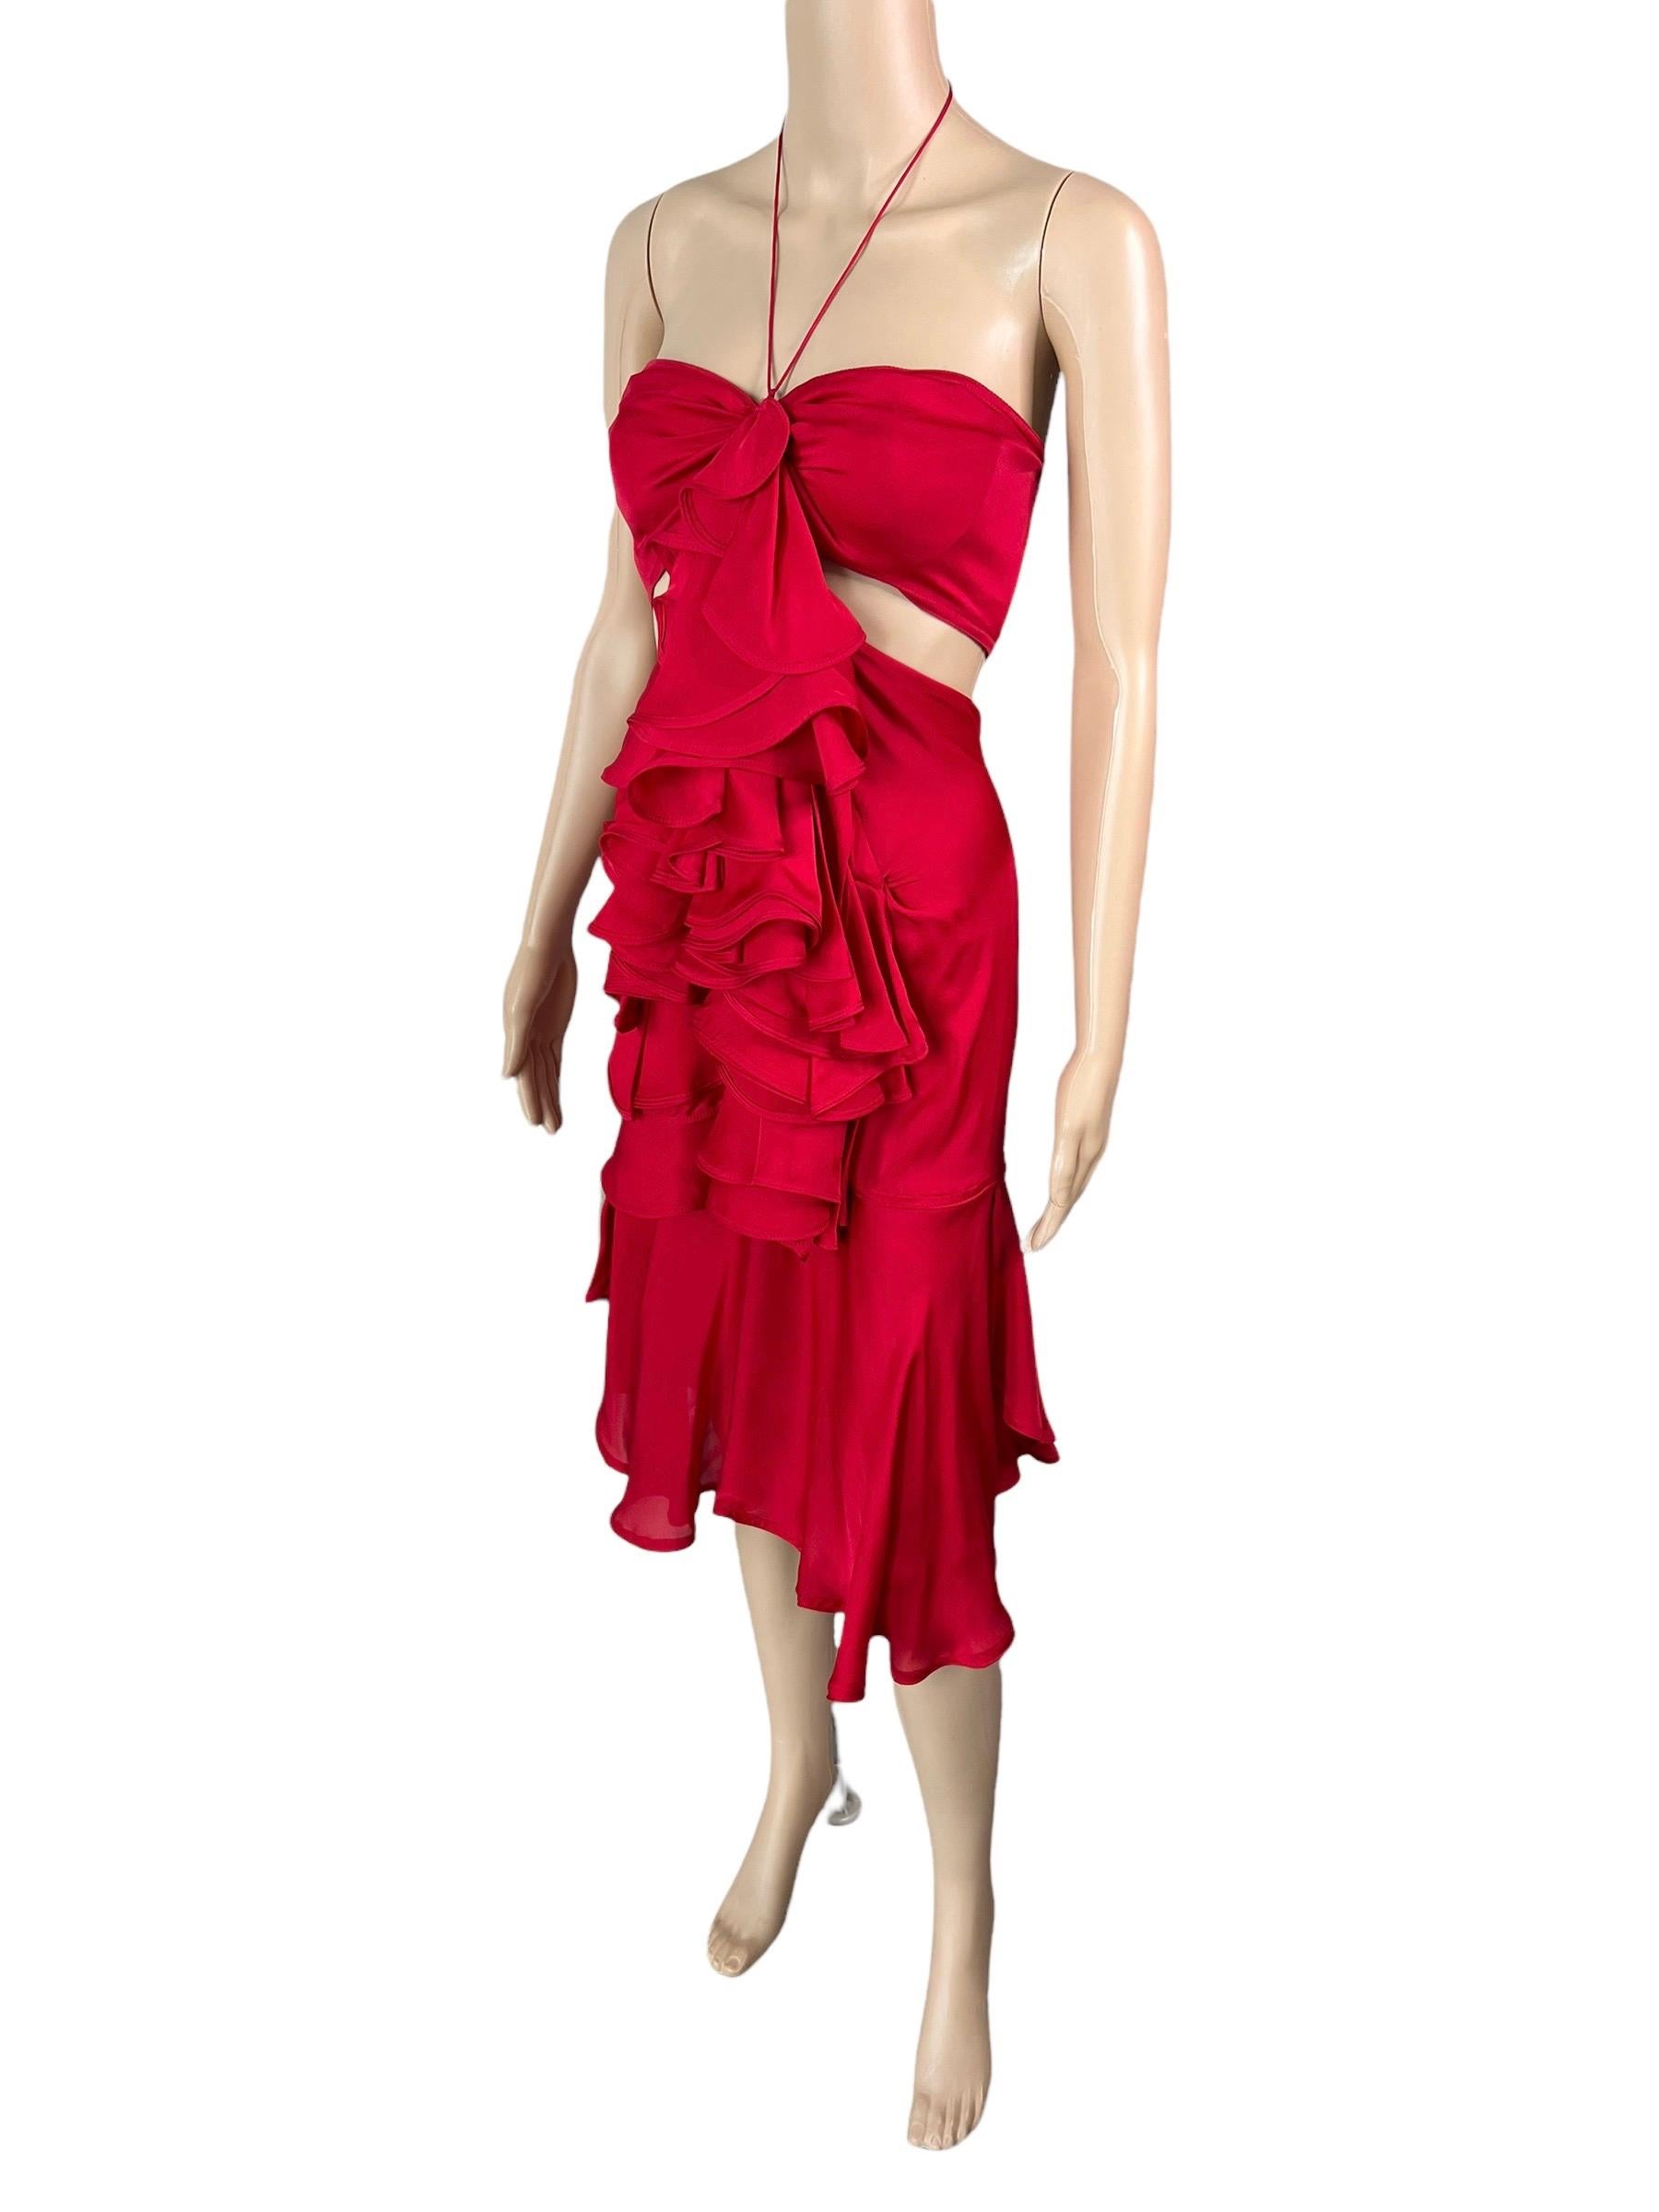 Tom Ford for Yves Saint Laurent  F/W 2003 Runway Ruffled Cutout Bra Red Dress  For Sale 4